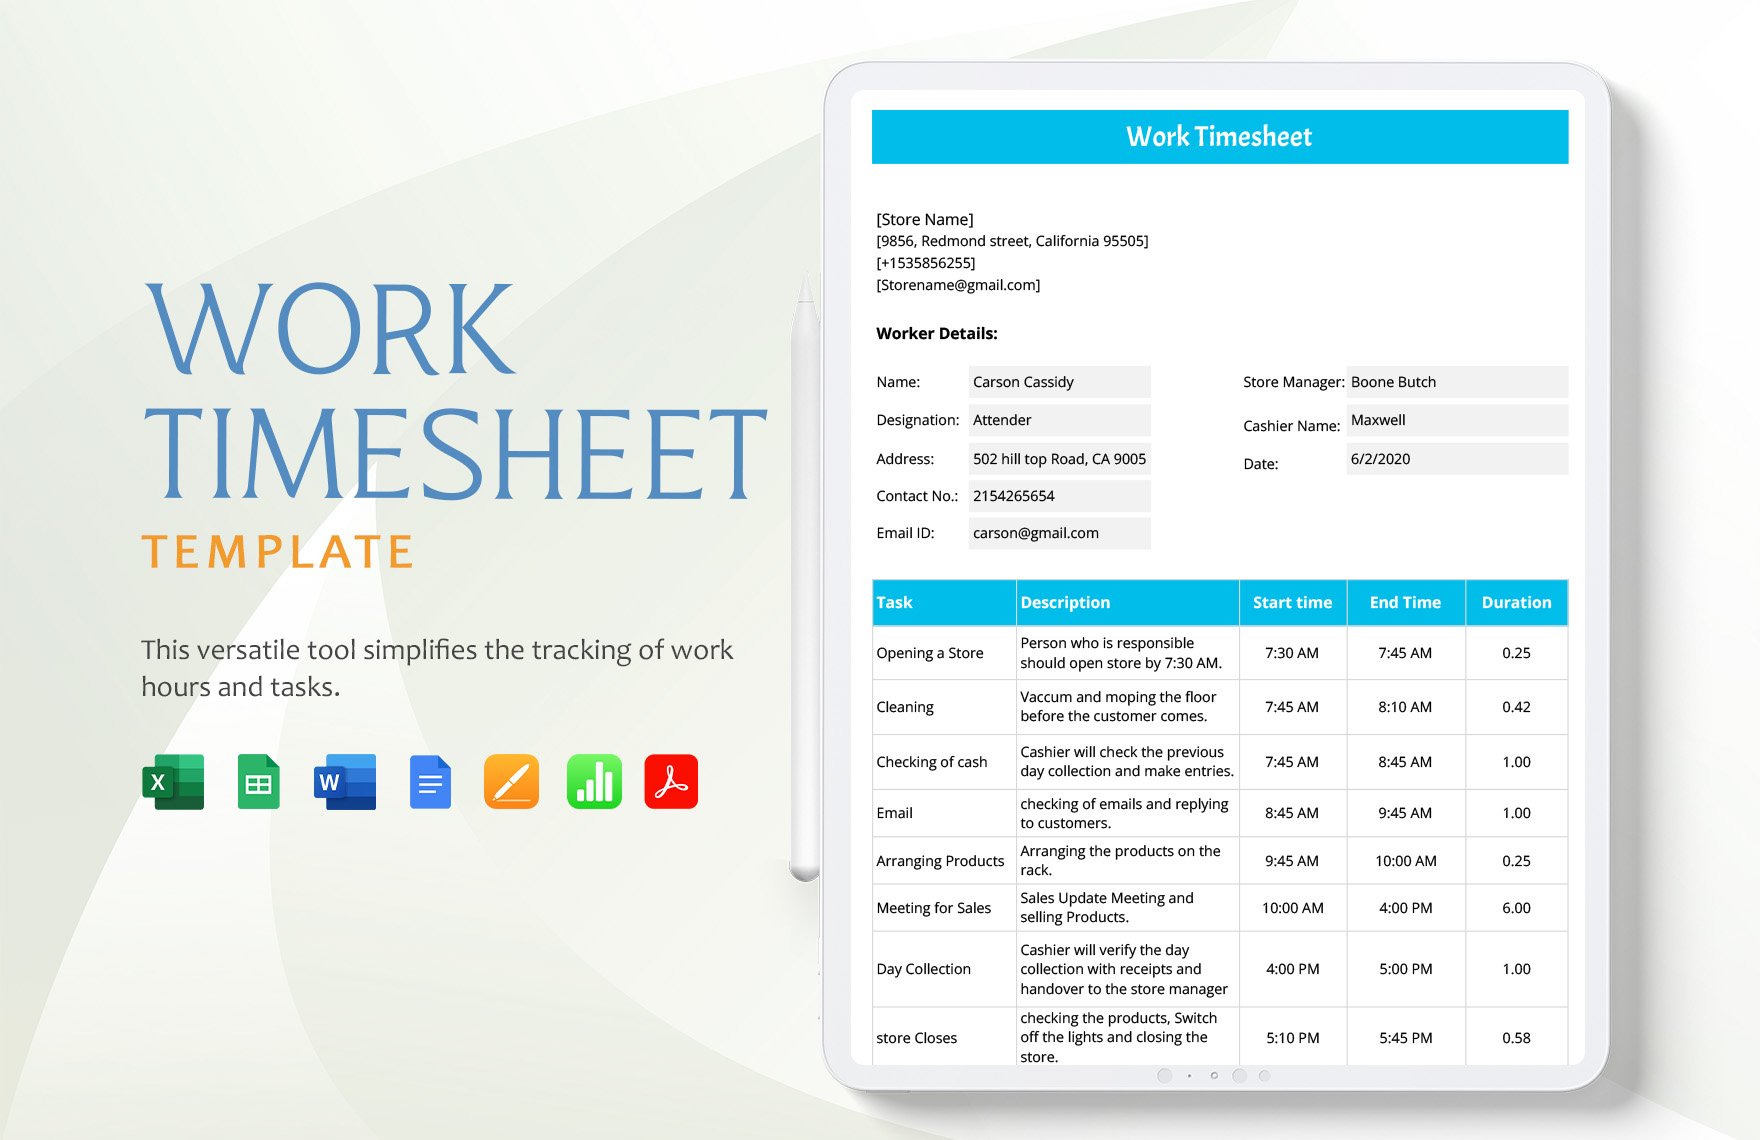 Work Timesheet Template in Word, Google Docs, Excel, PDF, Google Sheets, Apple Pages, Apple Numbers